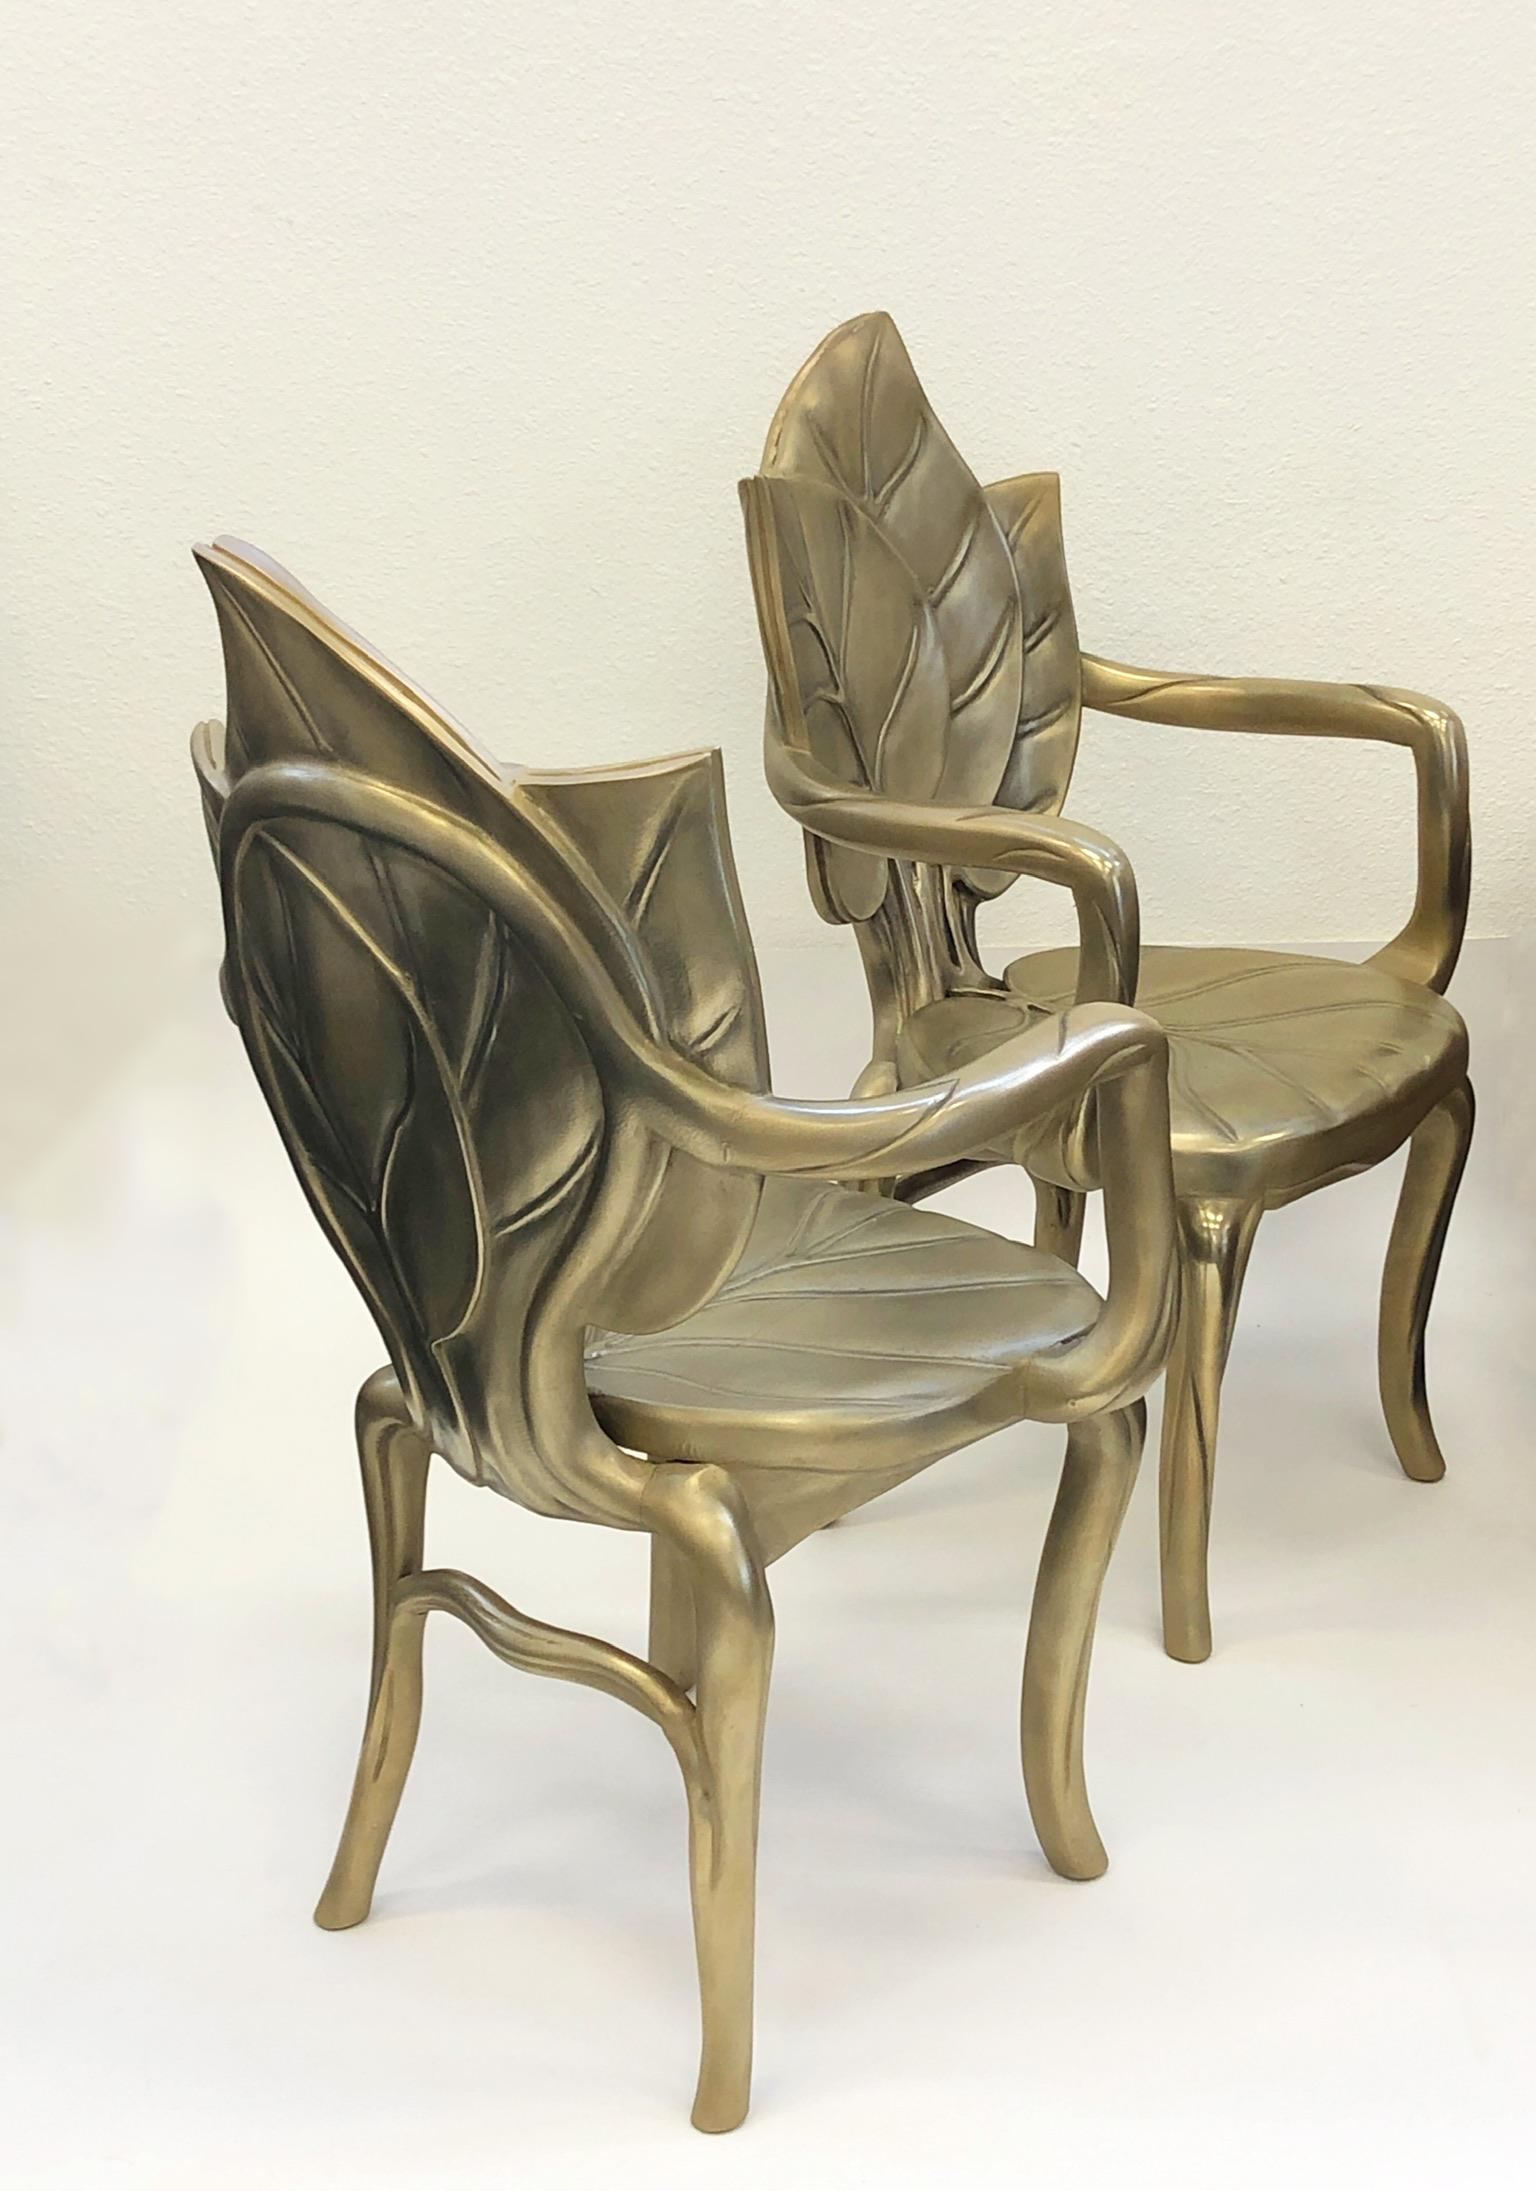 Hand-Carved Pair of Italian Brass Carved Wooden Leaf Armchairs by Bartolozzi and Maioli For Sale